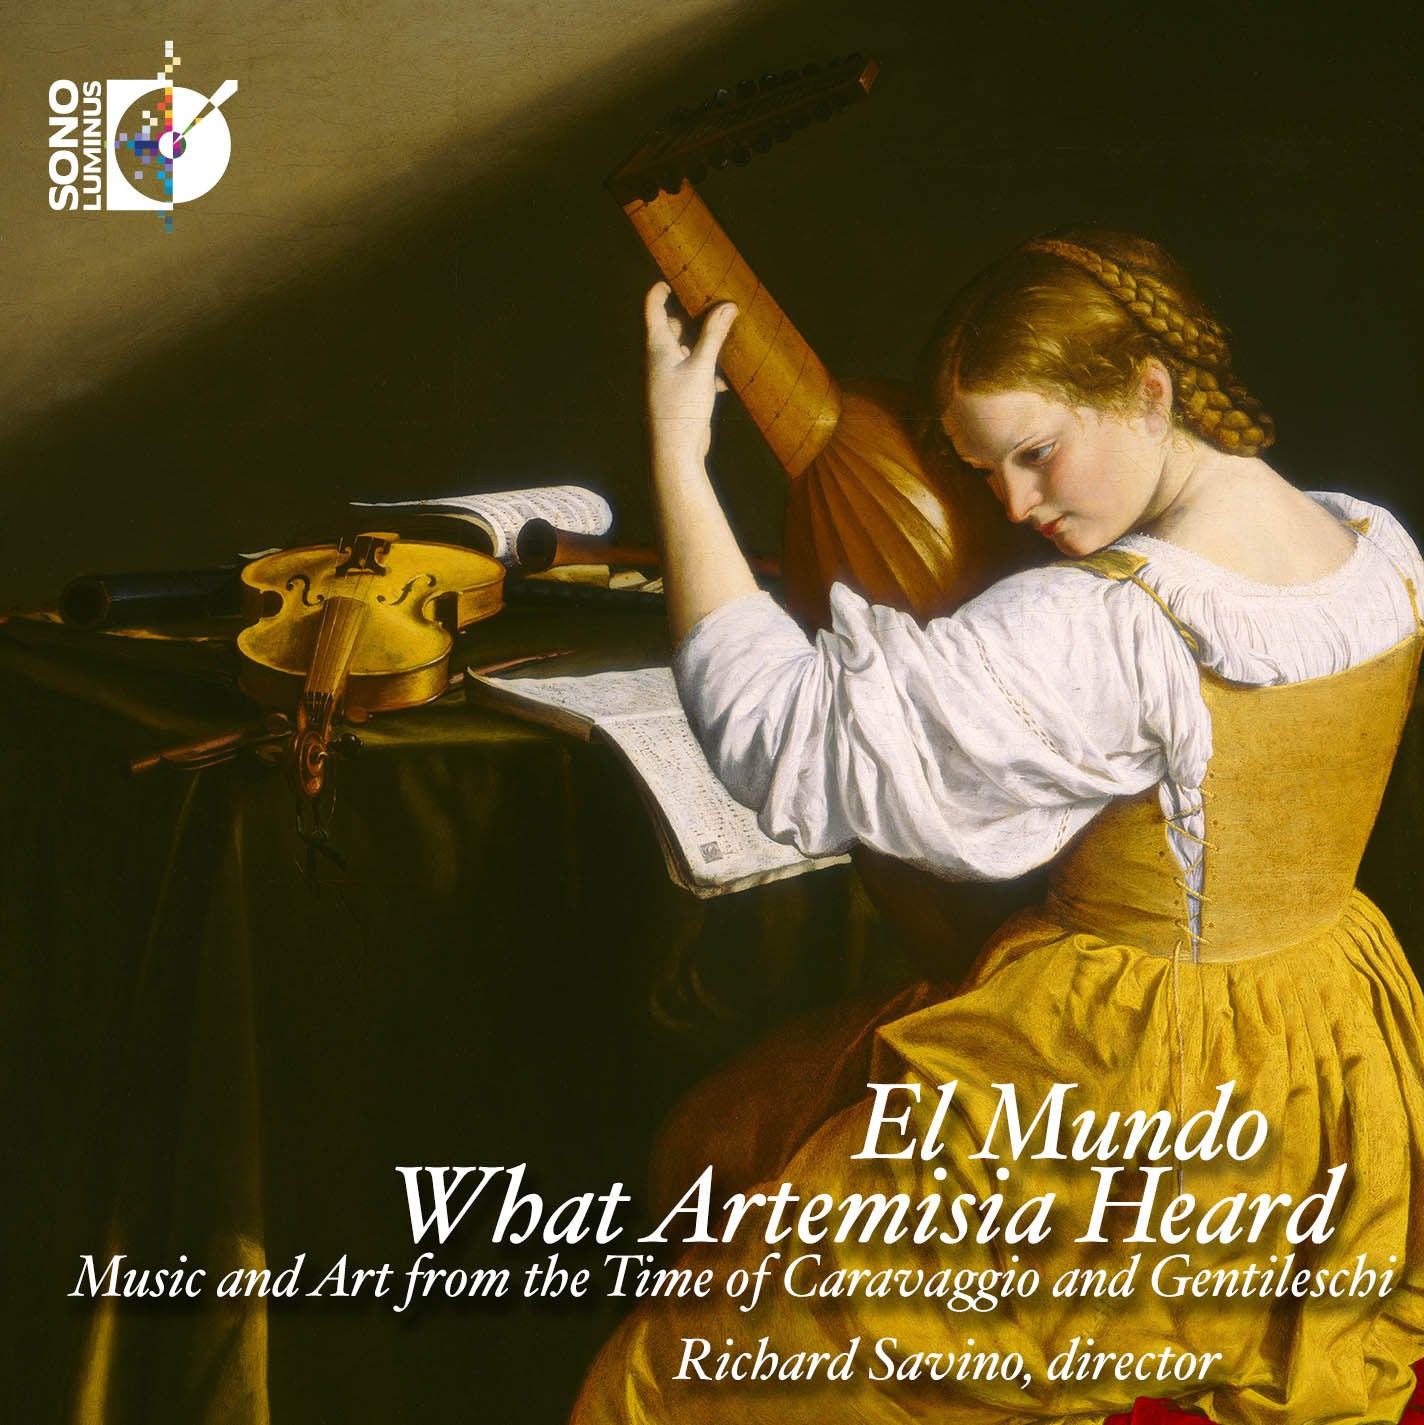 What Artemisia Heard: Music and Art from the Time of Caravaggio and Gentileschi / El Mundo